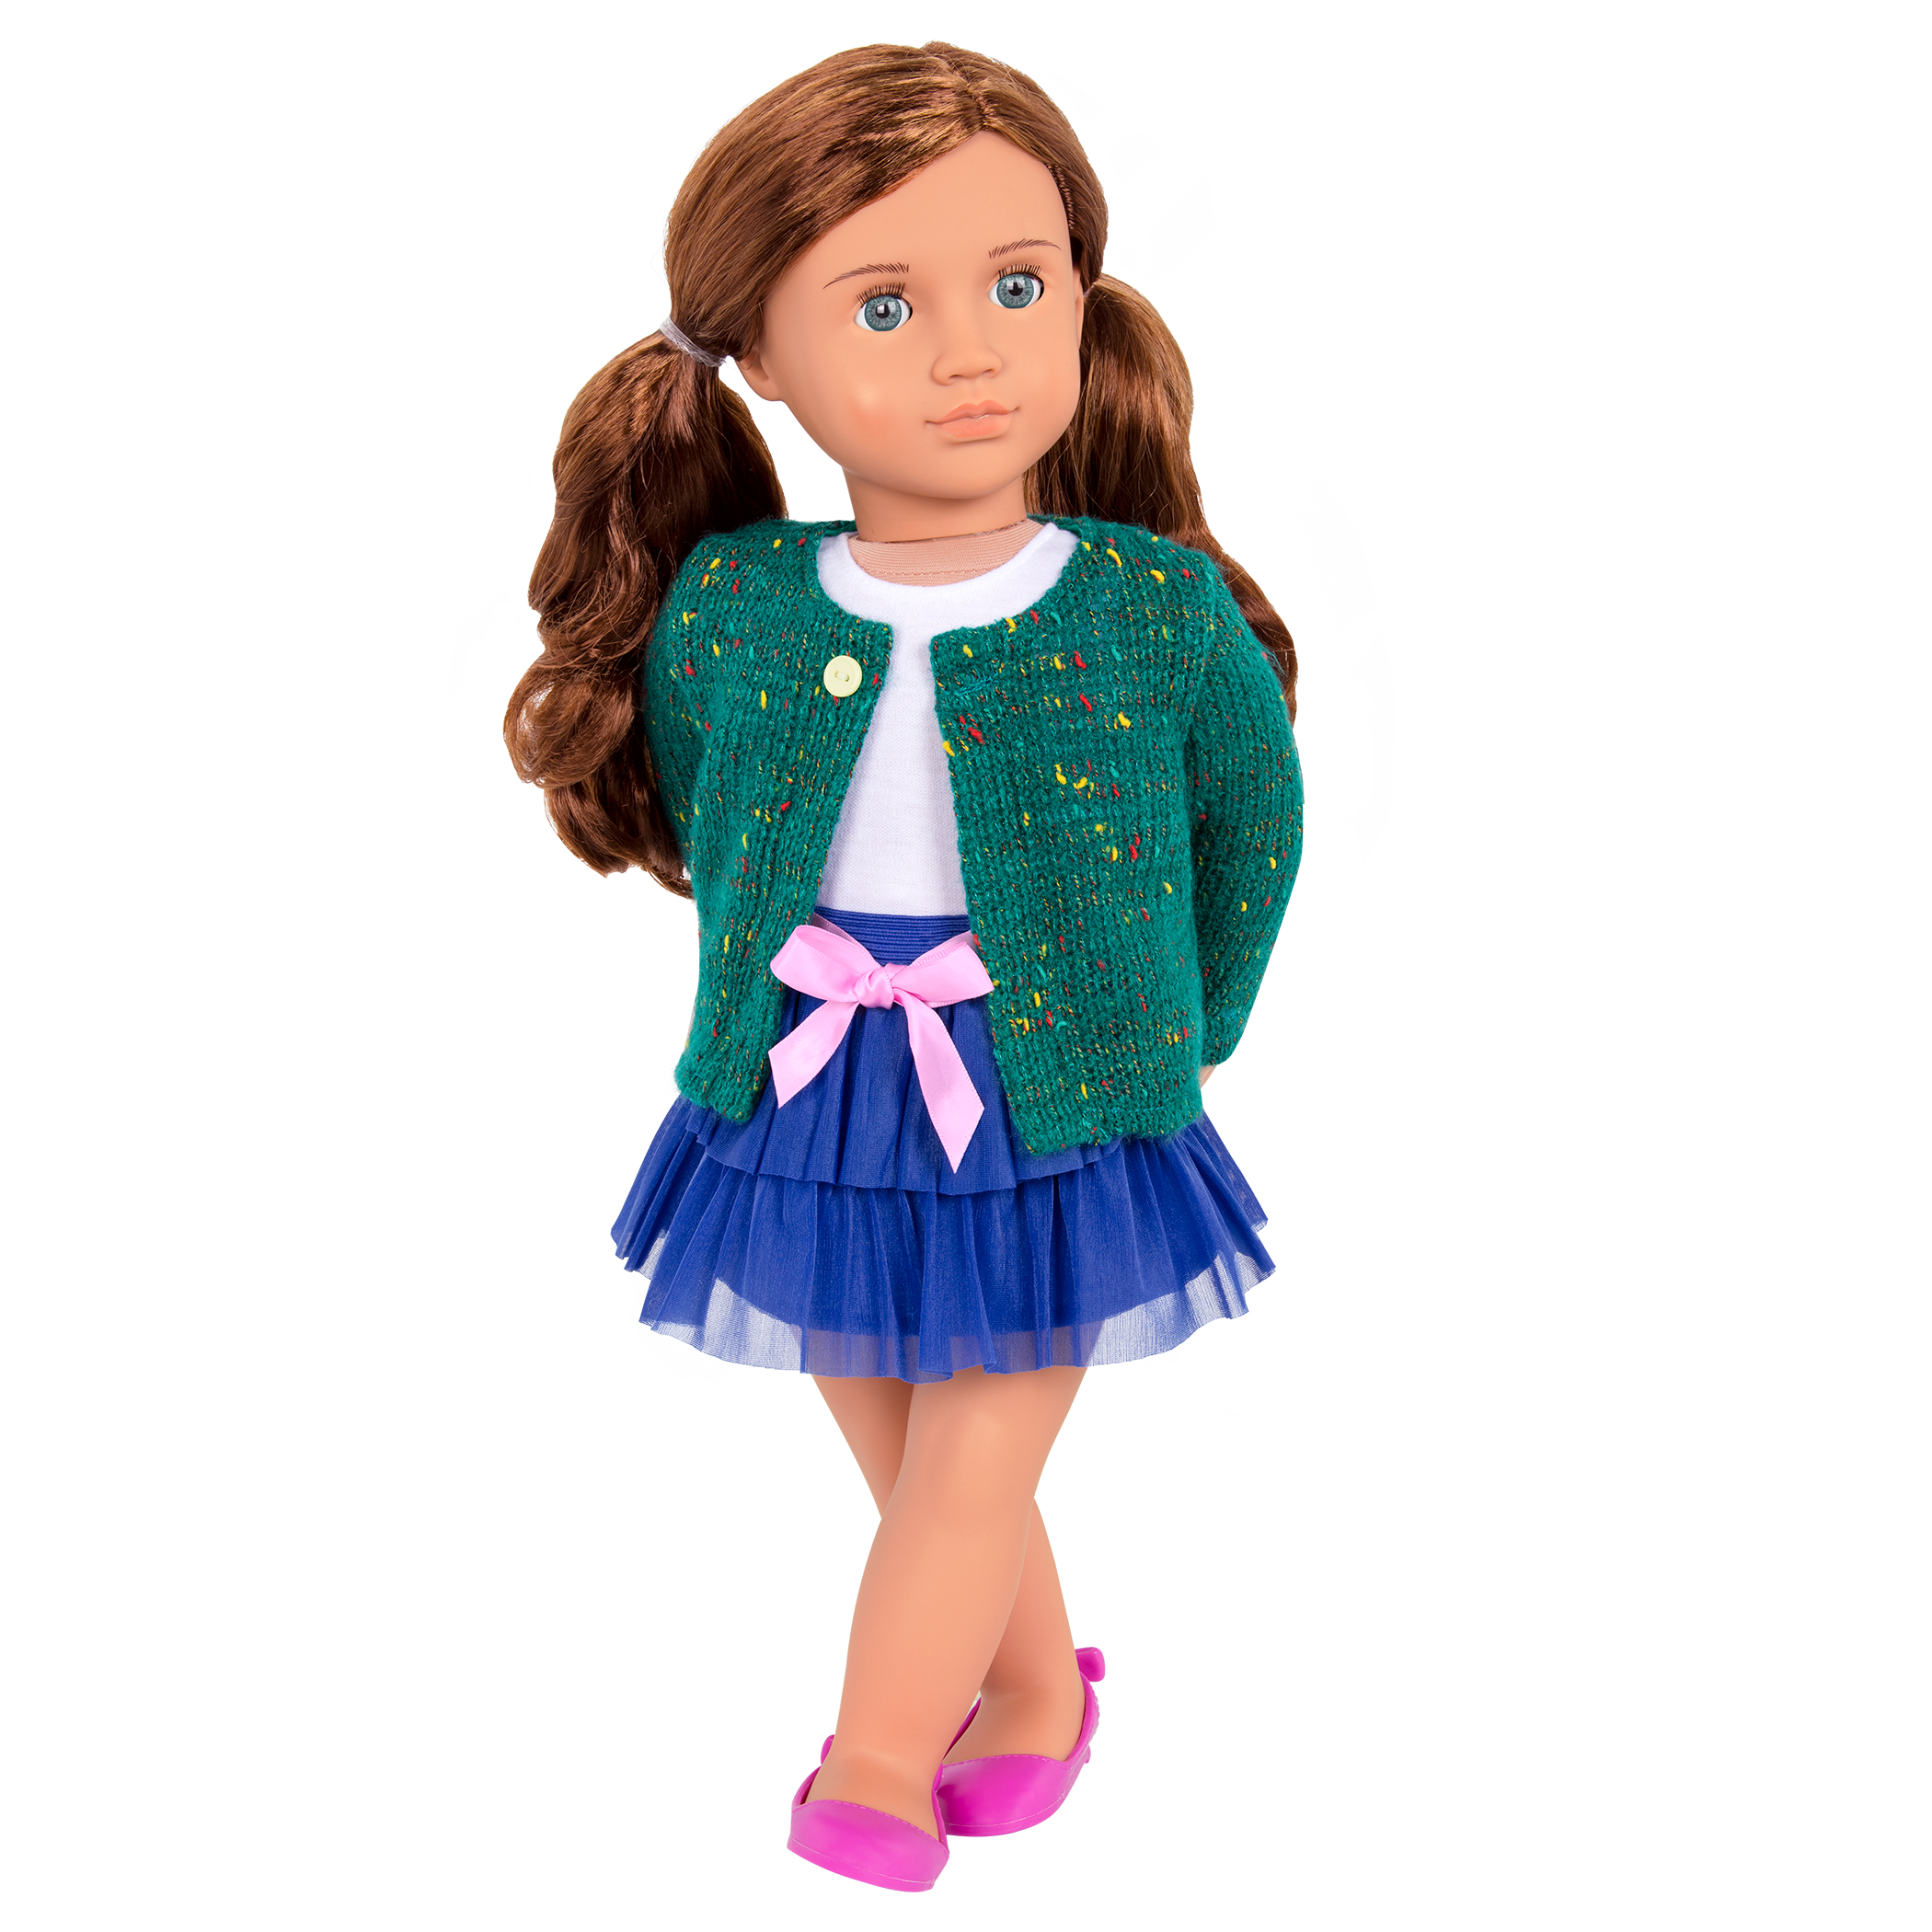 Cardigan and ruffle skirt for 18-inch doll